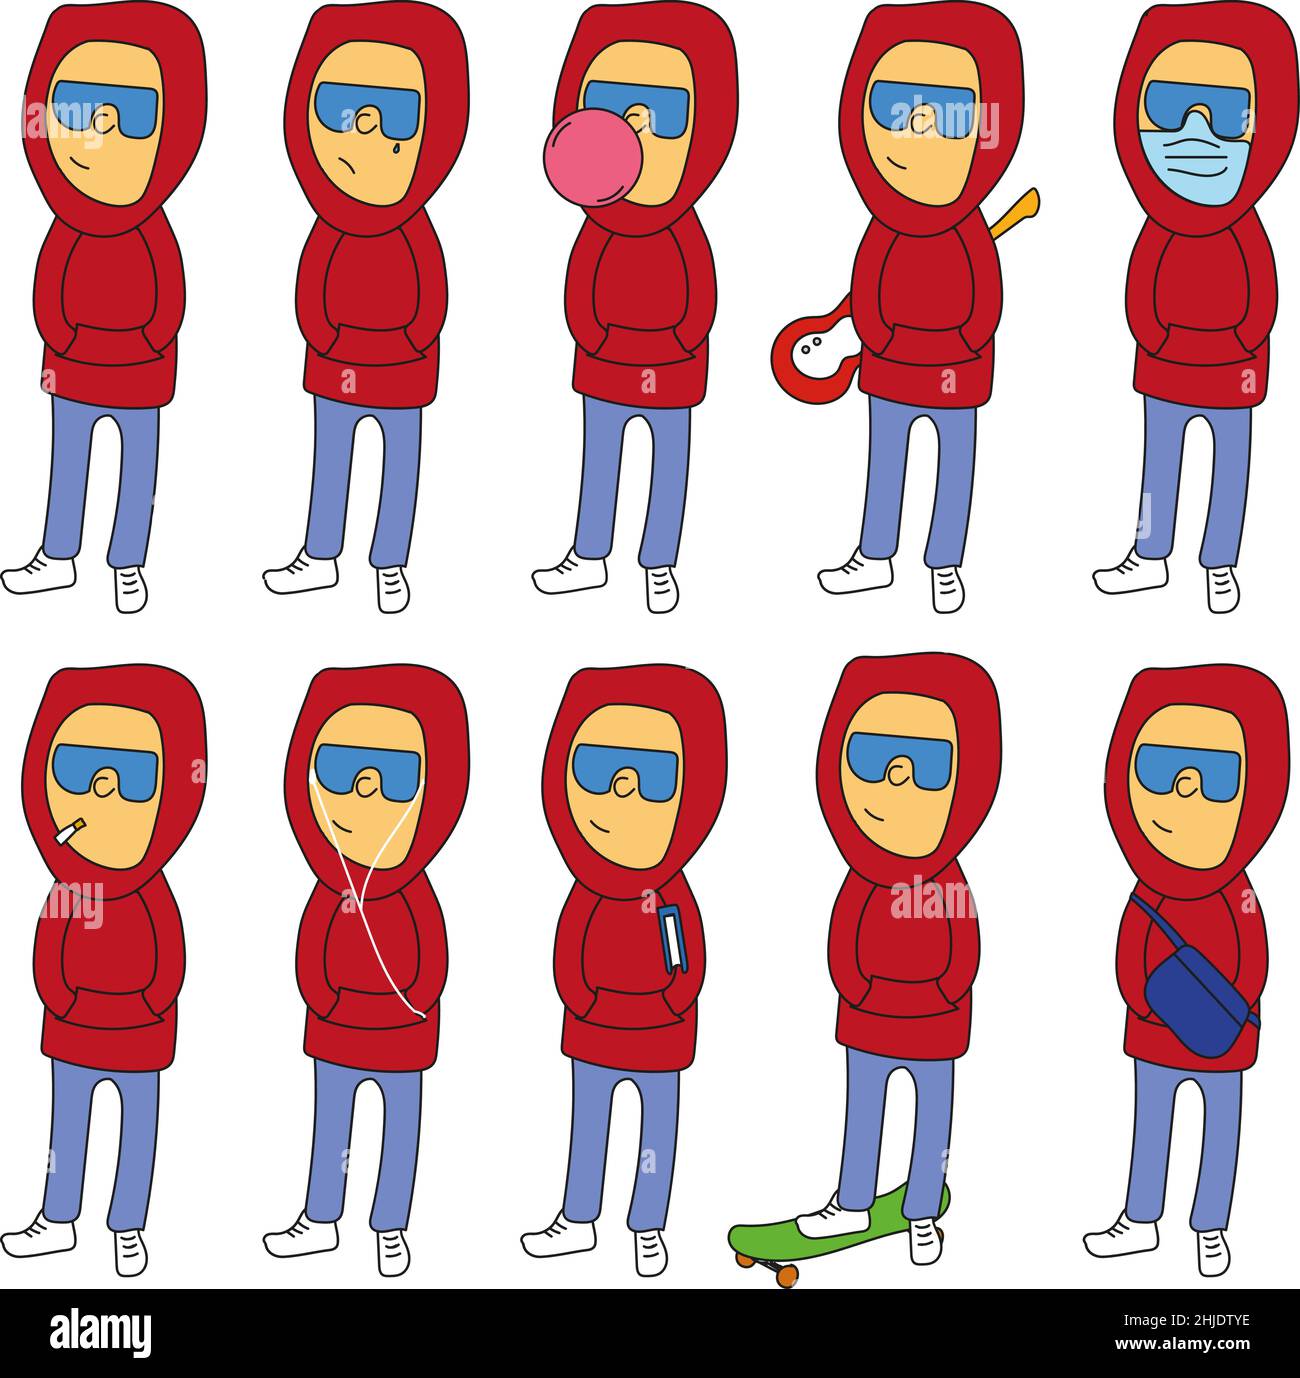 Pack of 10 Bad Teenage Boys in a red hoodie with skateboard, bubble gum, book, guitar, mask, smoking a cigarette, smiling, sad, hands in pockets Stock Vector